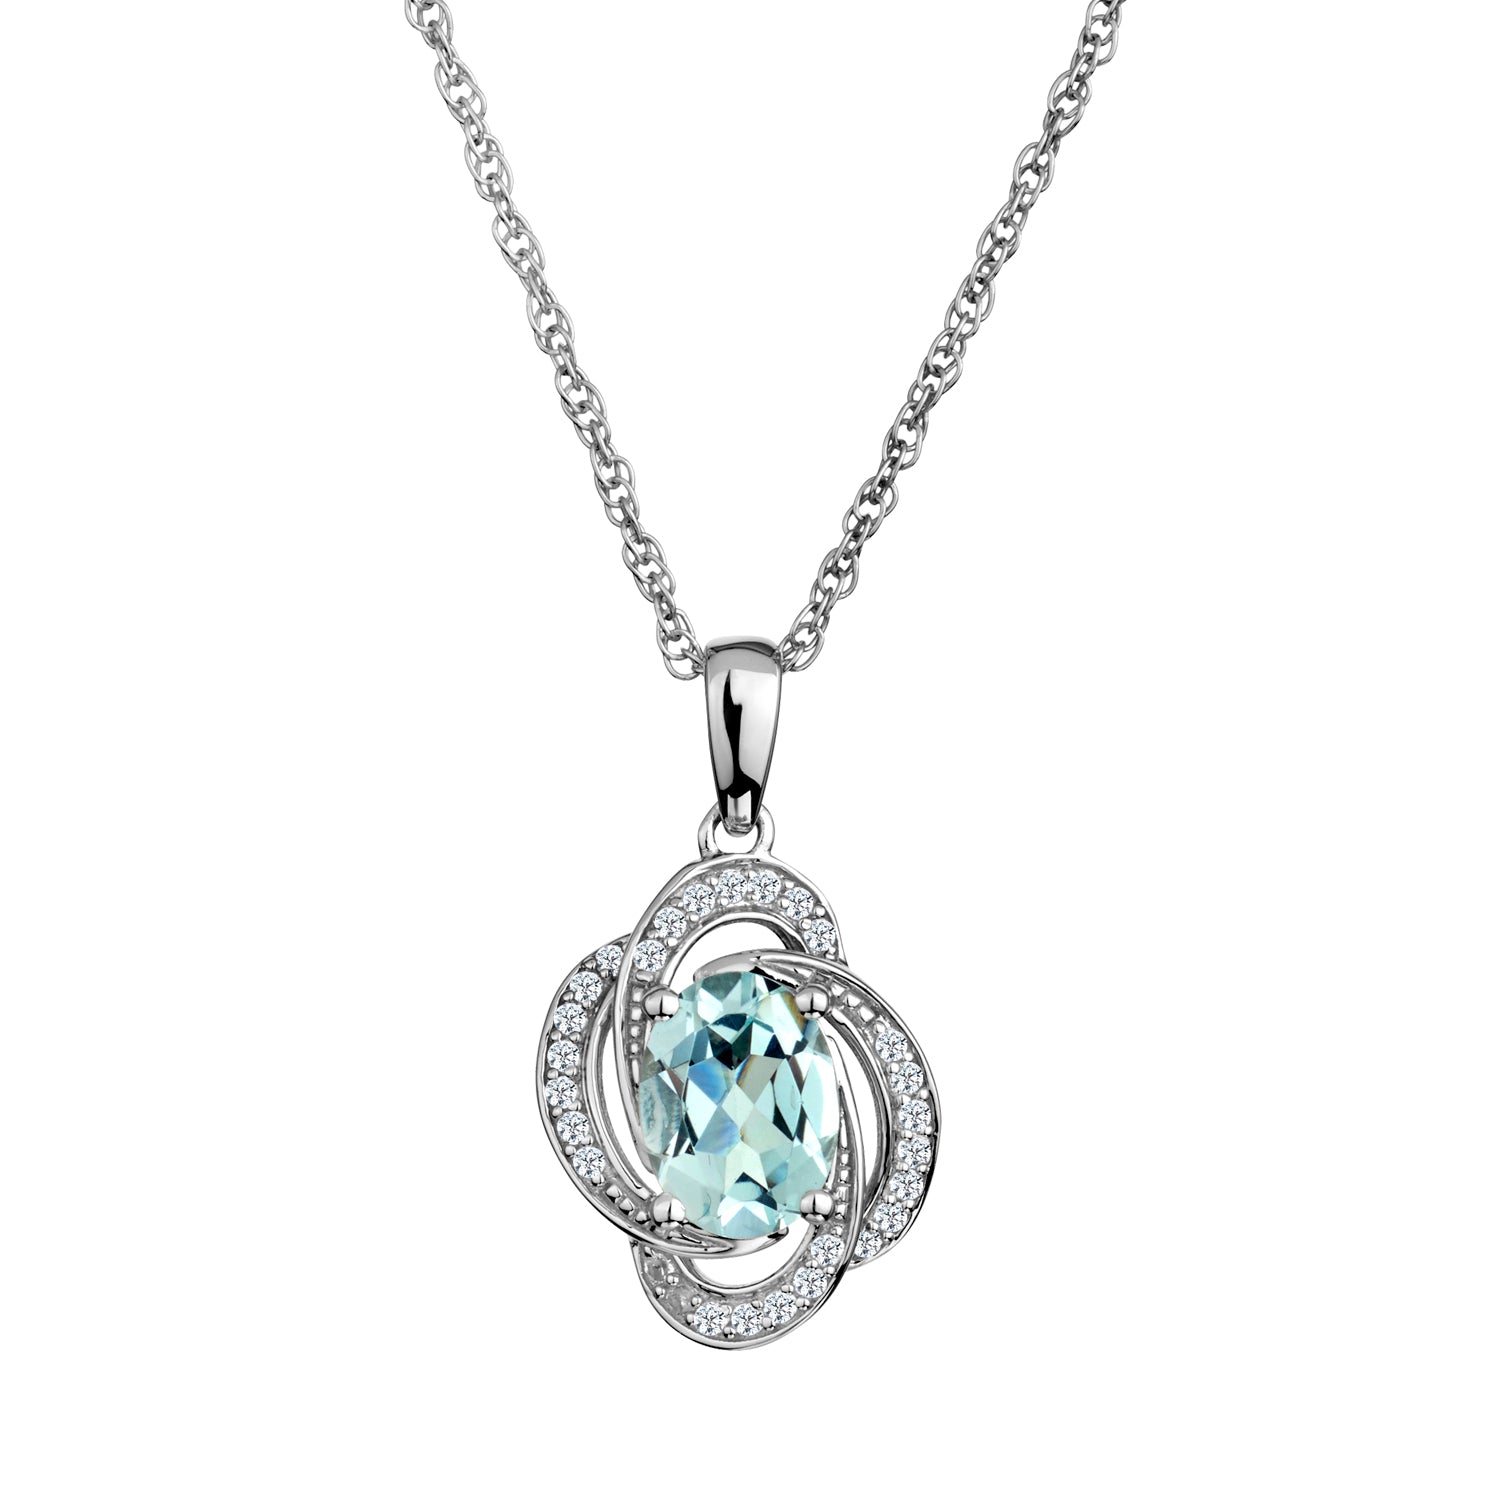 Genuine Aquamarine & White Sapphire Pendant,  Sterling Silver. Necklaces and Pendants. Griffin Jewellery Designs. 